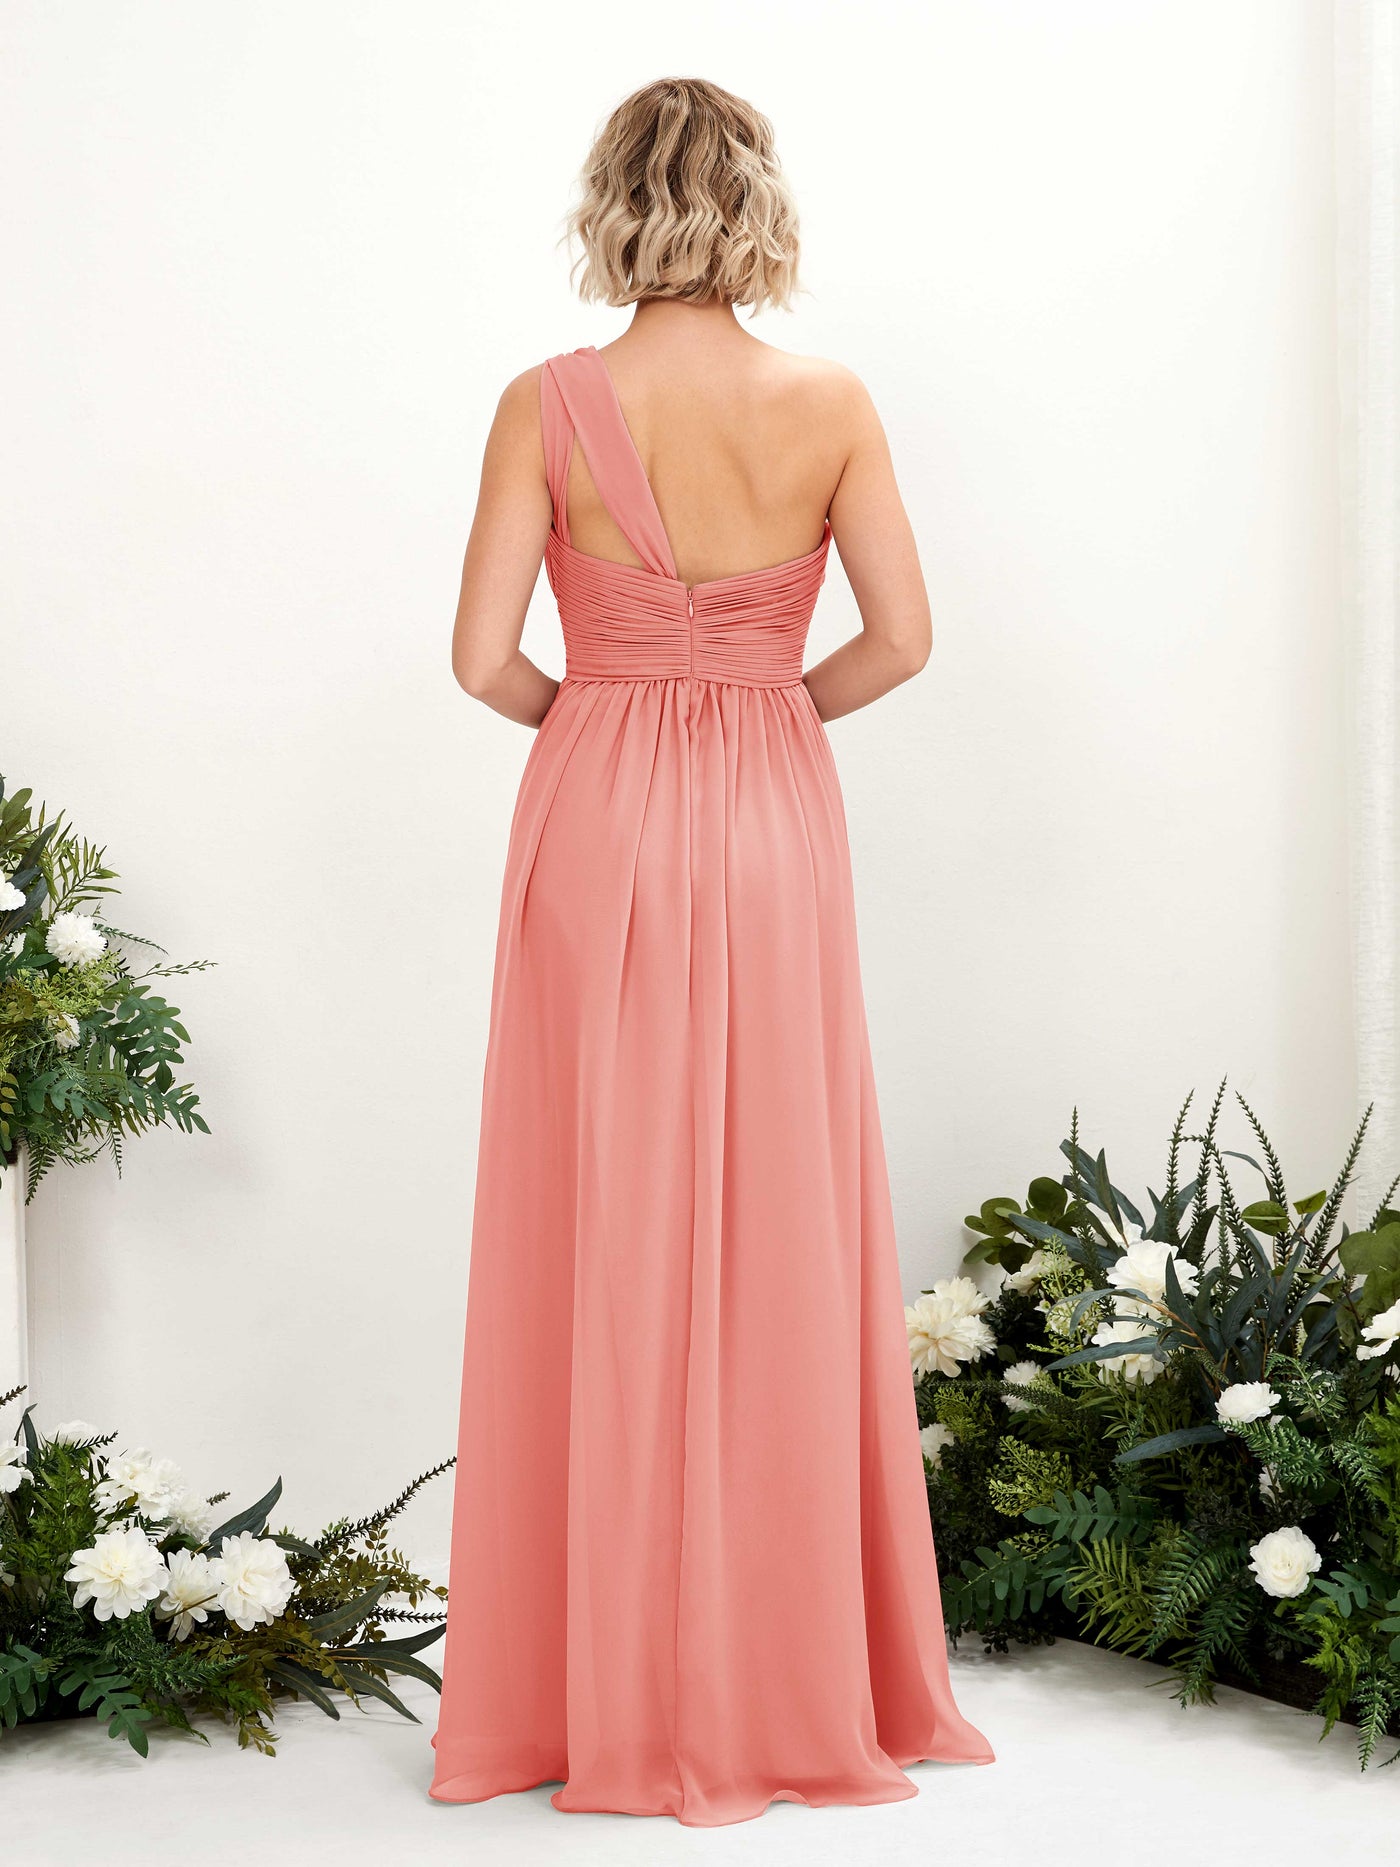 Peach Pink Bridesmaid Dresses Bridesmaid Dress Ball Gown Chiffon One Shoulder Full Length Sleeveless Wedding Party Dress (81225029)#color_peach-pink